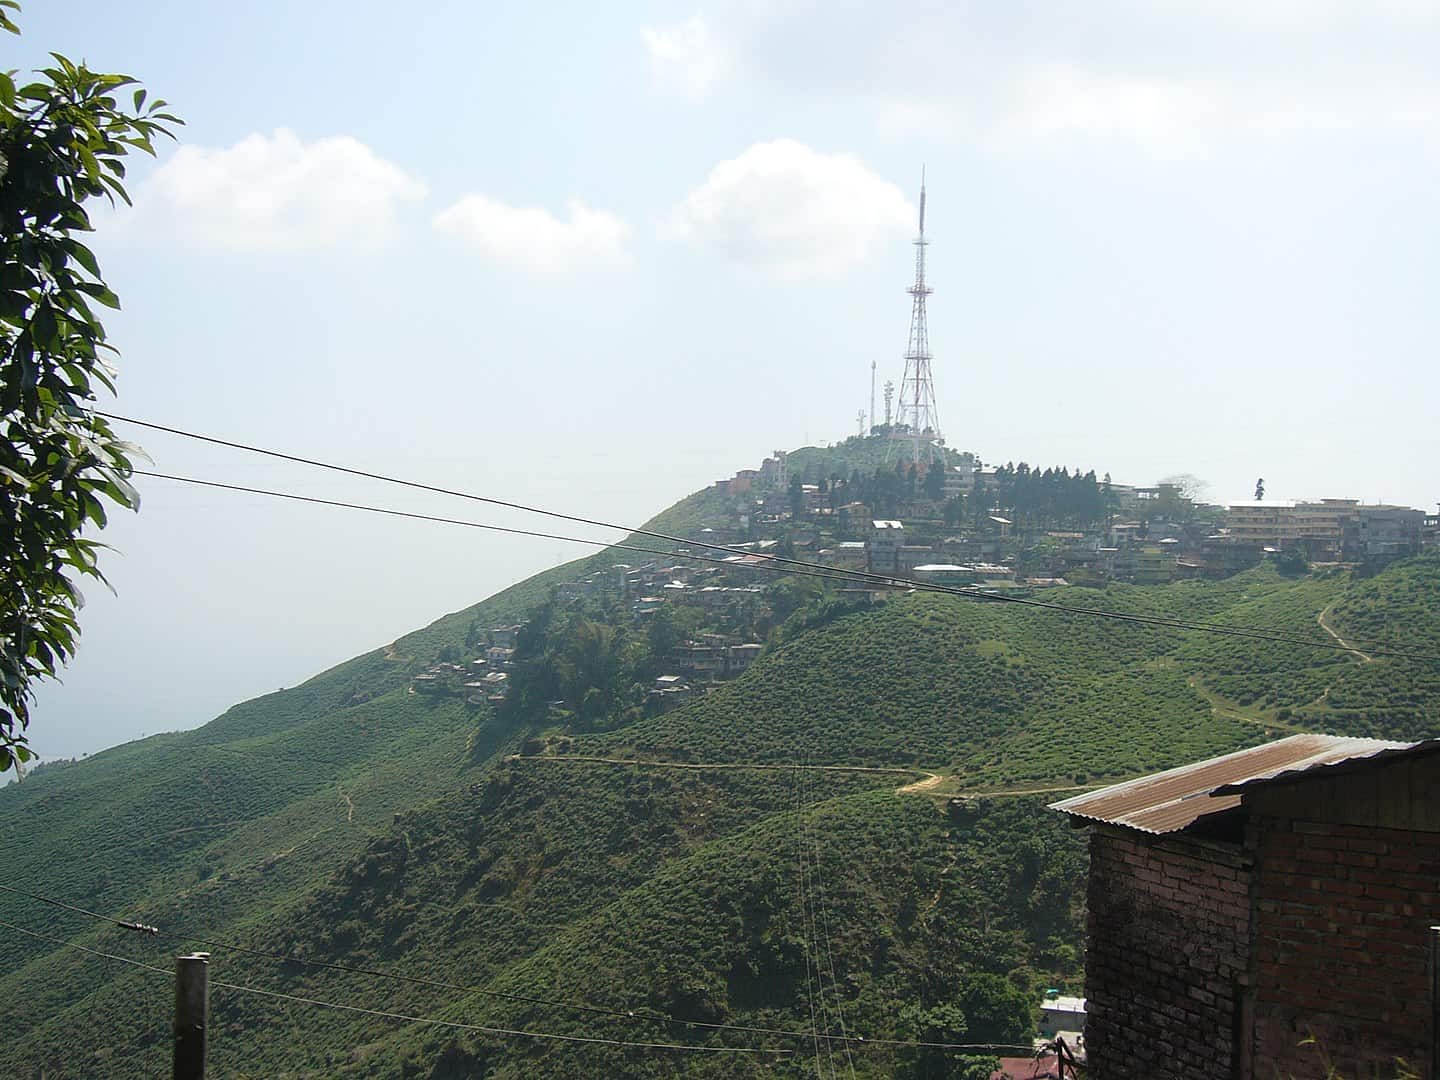 Kurseong - places to visit in West Bengal